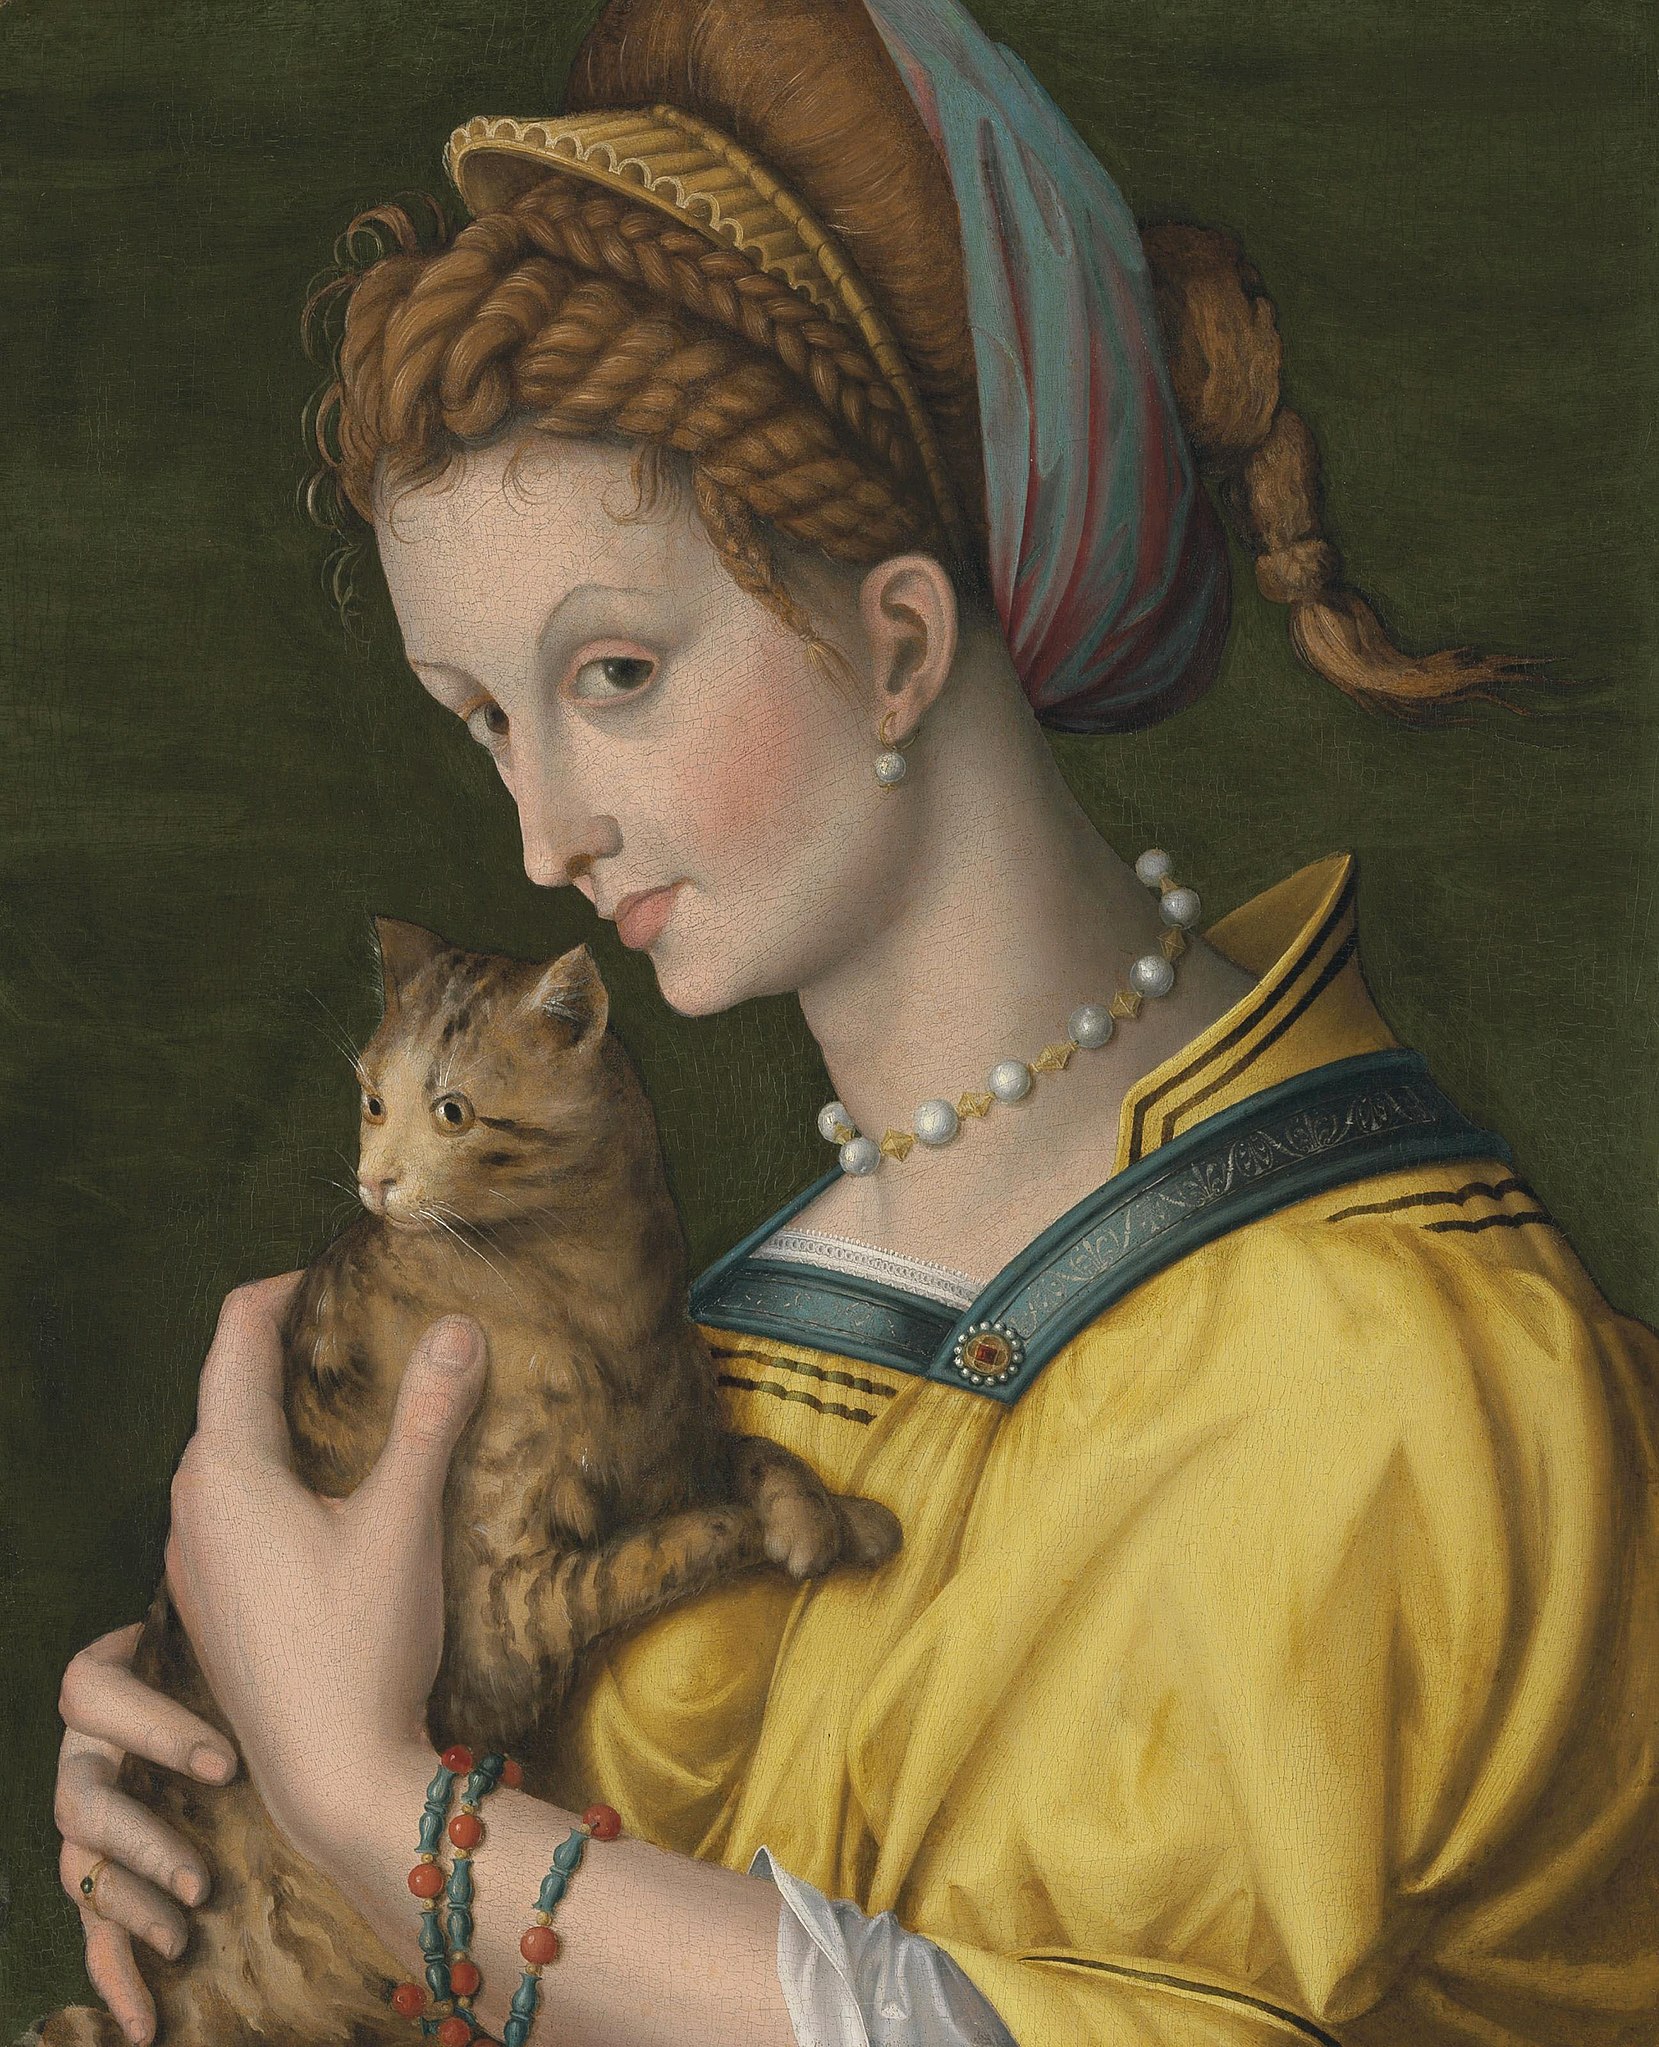 Portrait of a Young Lady Holding a Cat by Antonio d'Ubertino Verdi, called Bachiacca - circa from 1525 until 1530 - 53.6 x 43.8 cm private collection